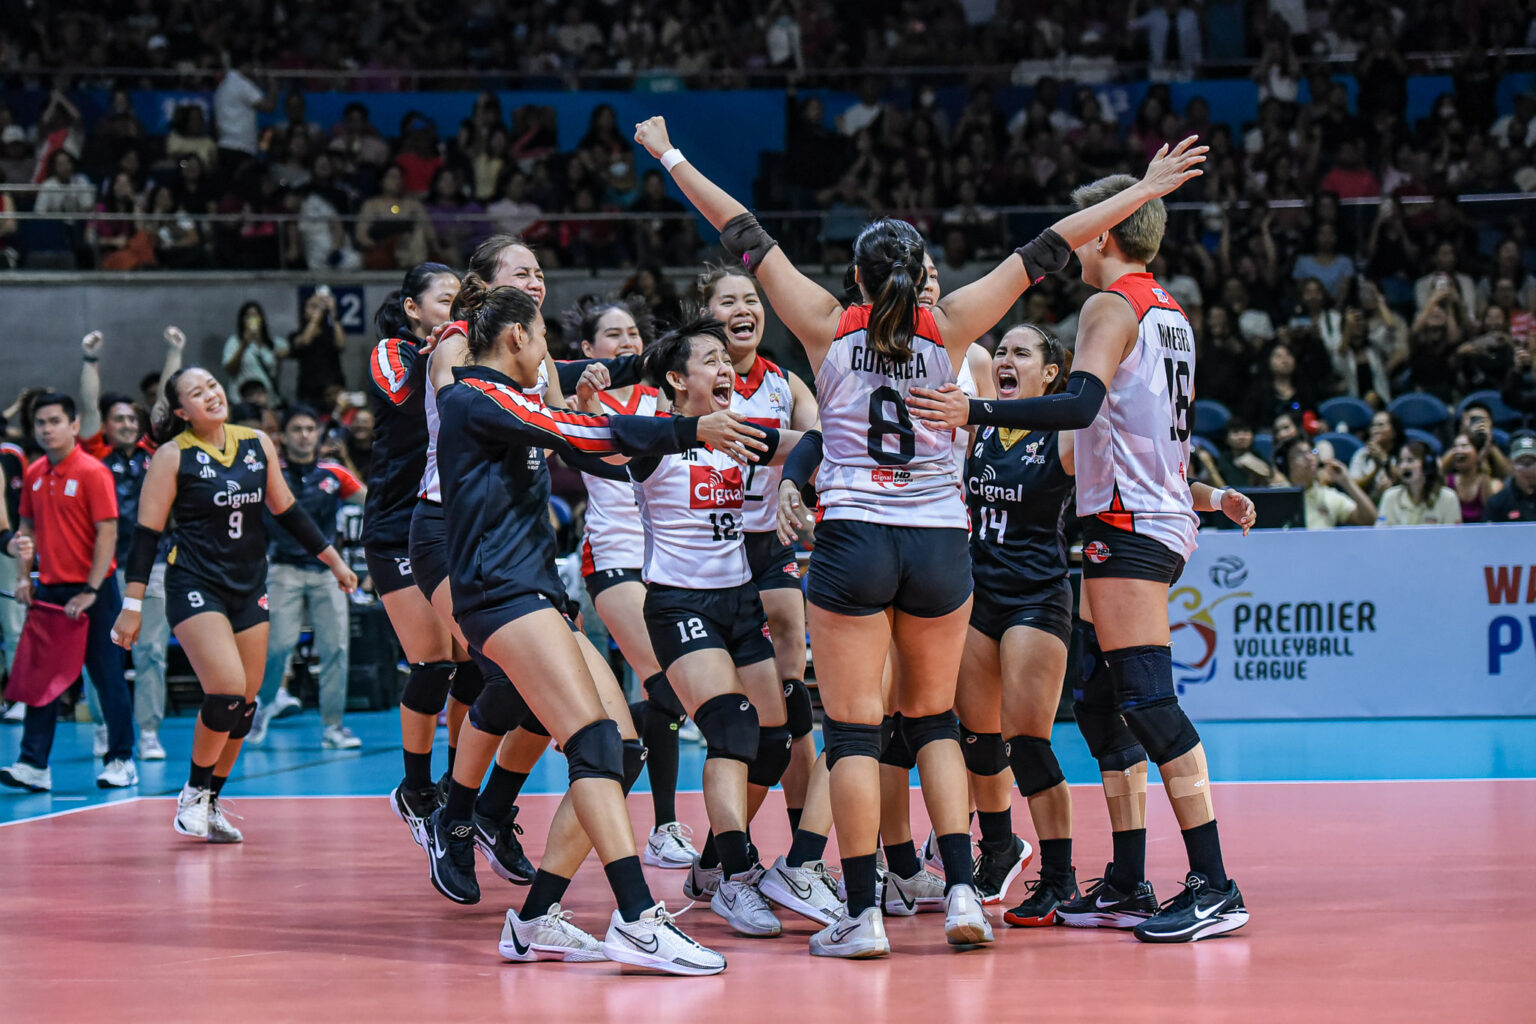 Cignal rebuild continues with Jovelyn Fernandez | Inquirer Sports